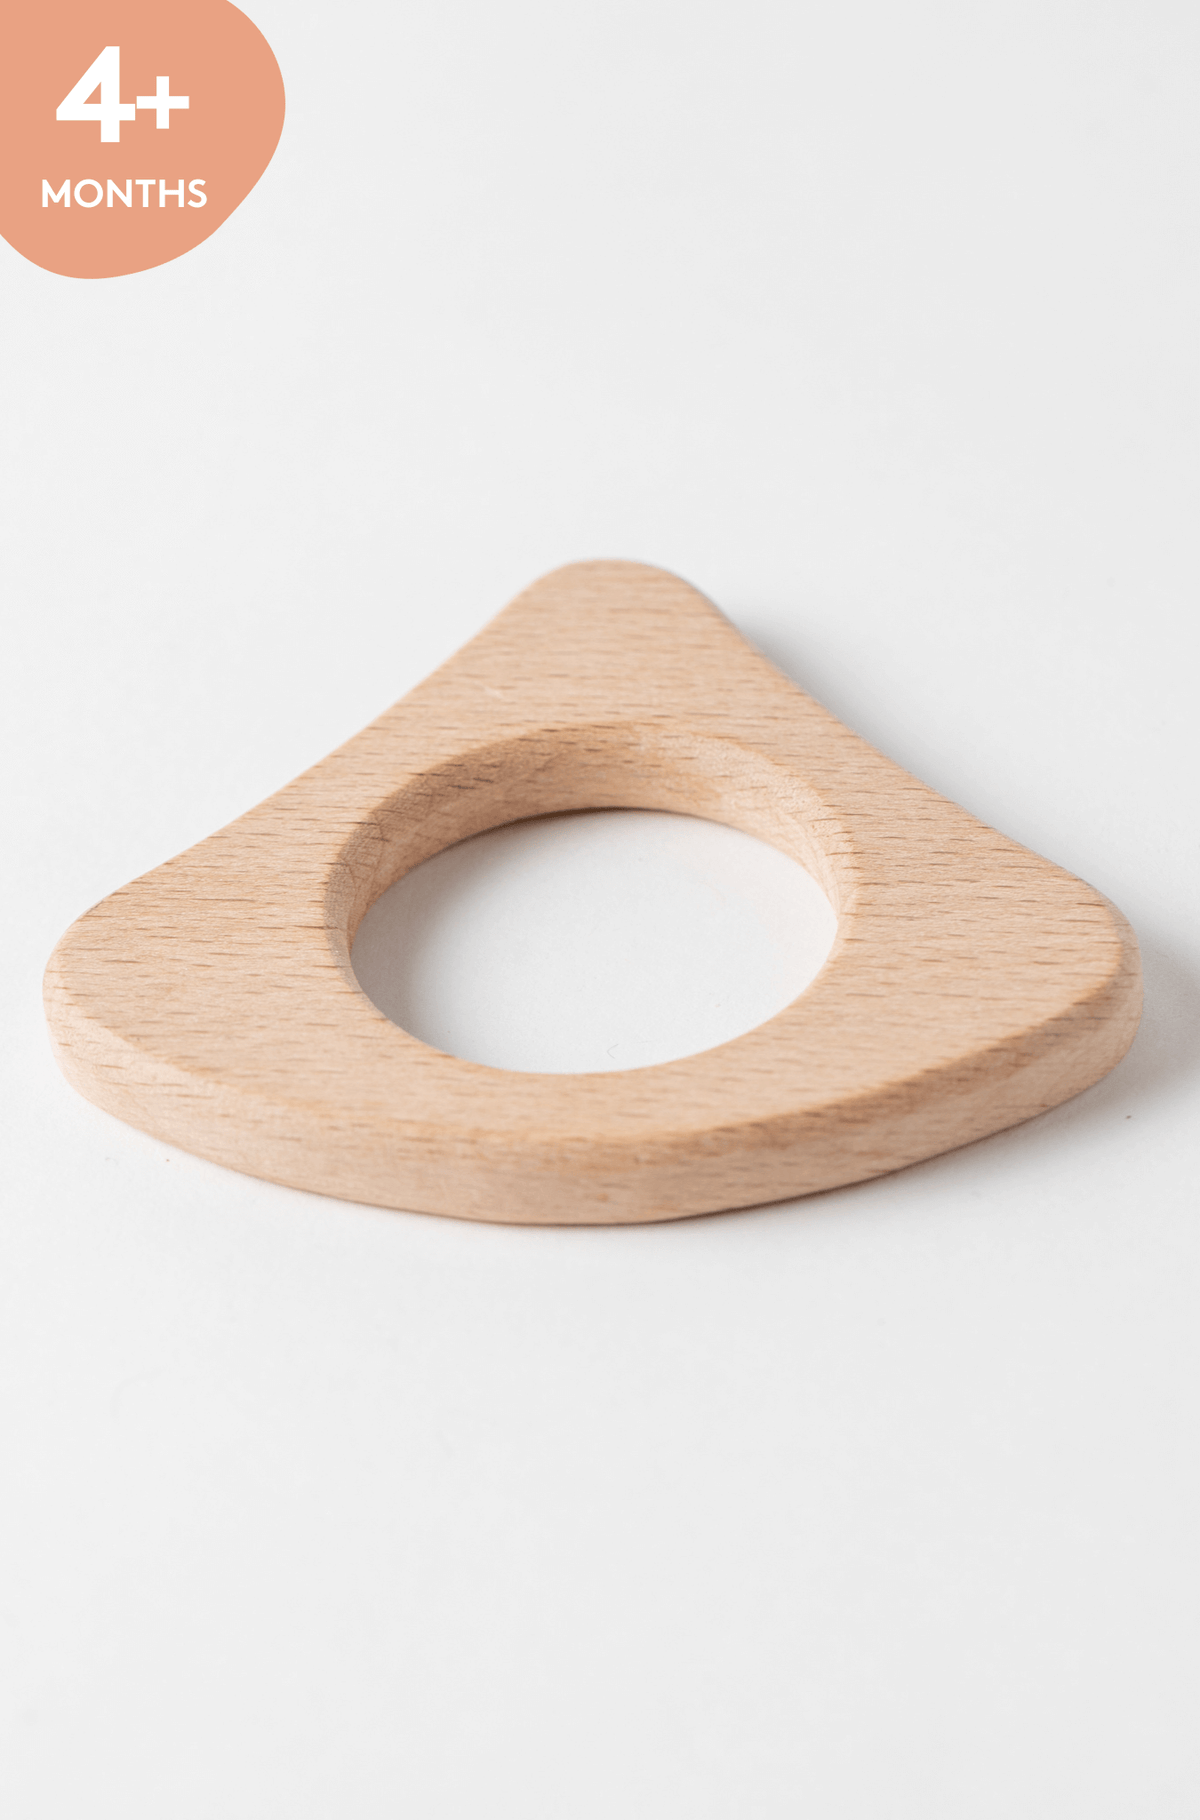 Wooden Triangle Teether